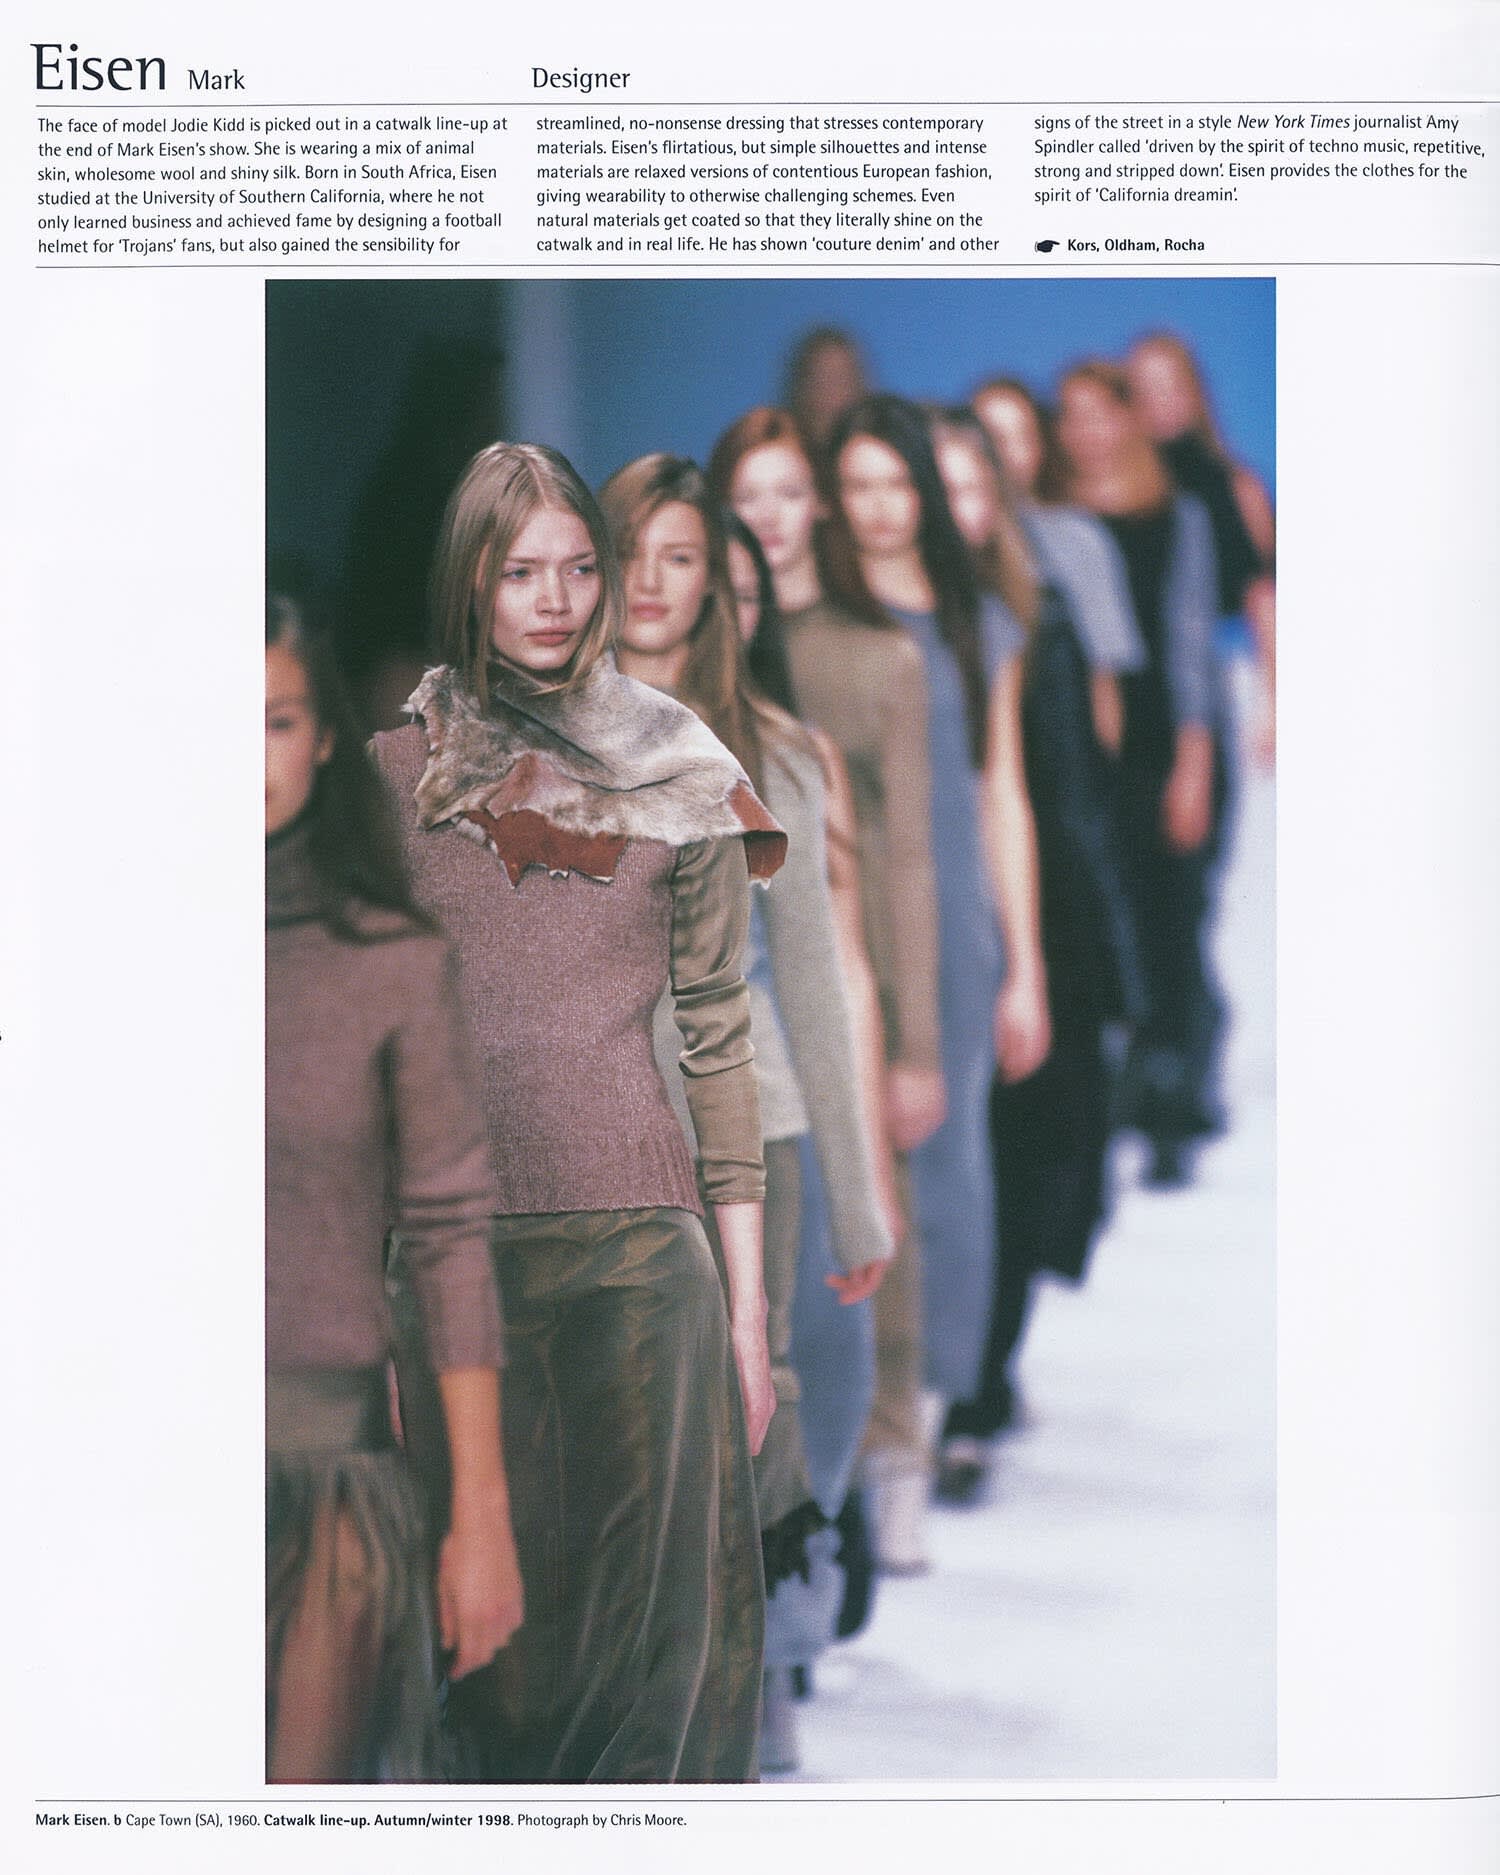 A page from The Fashion Book by Phaidon showing designer Mark Eisen's clothing designs being worn by models at a fashion show. 